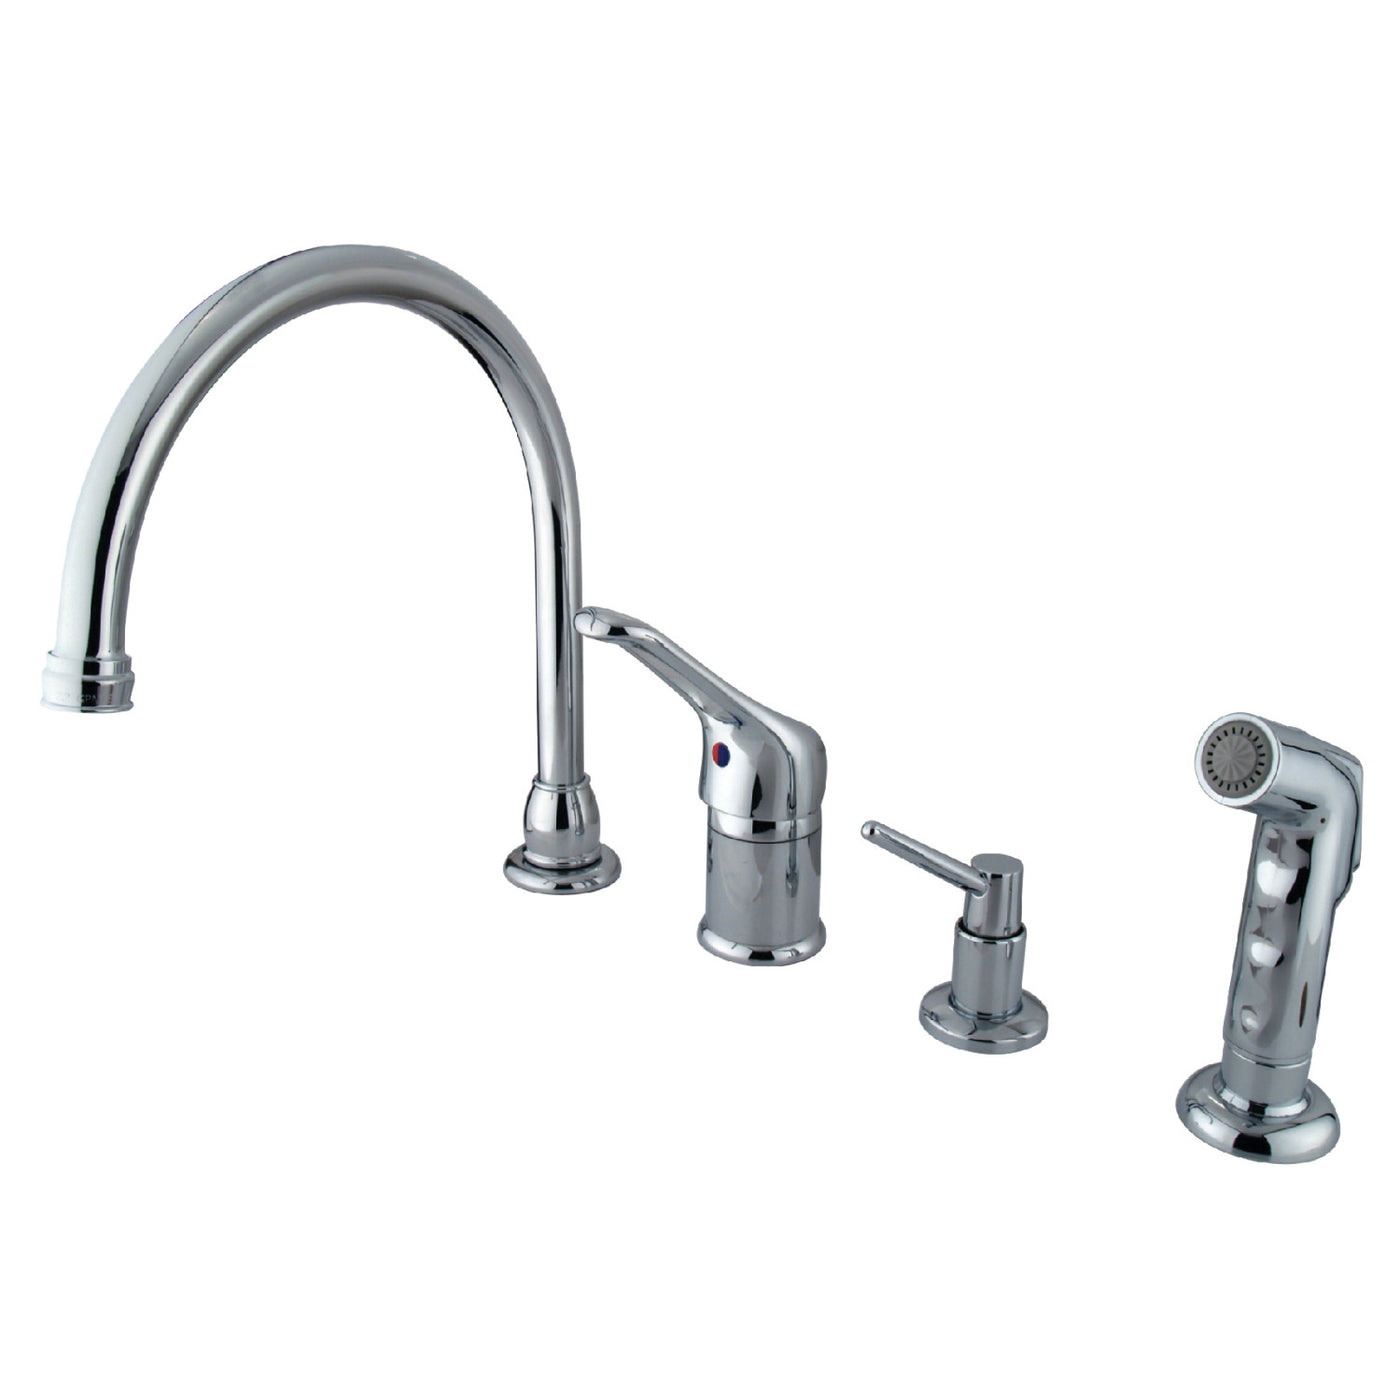 Elements of Design EB811K1 Single-Handle Widespread Kitchen Faucet Combo, Polished Chrome